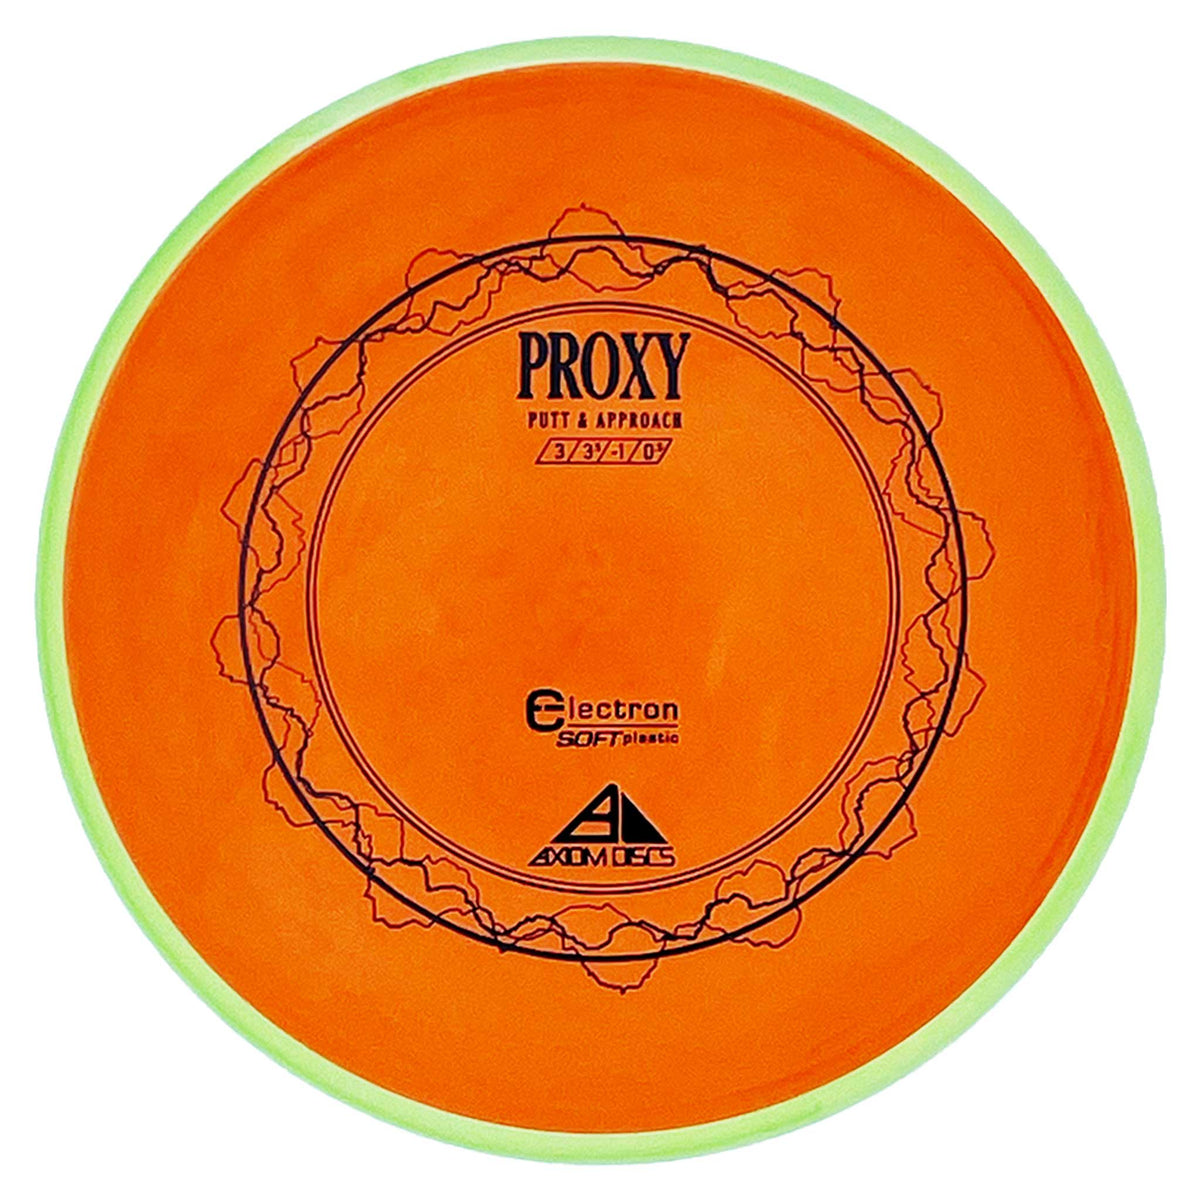 Axiom Discs Electron Soft Proxy putter and approach Green/Orange